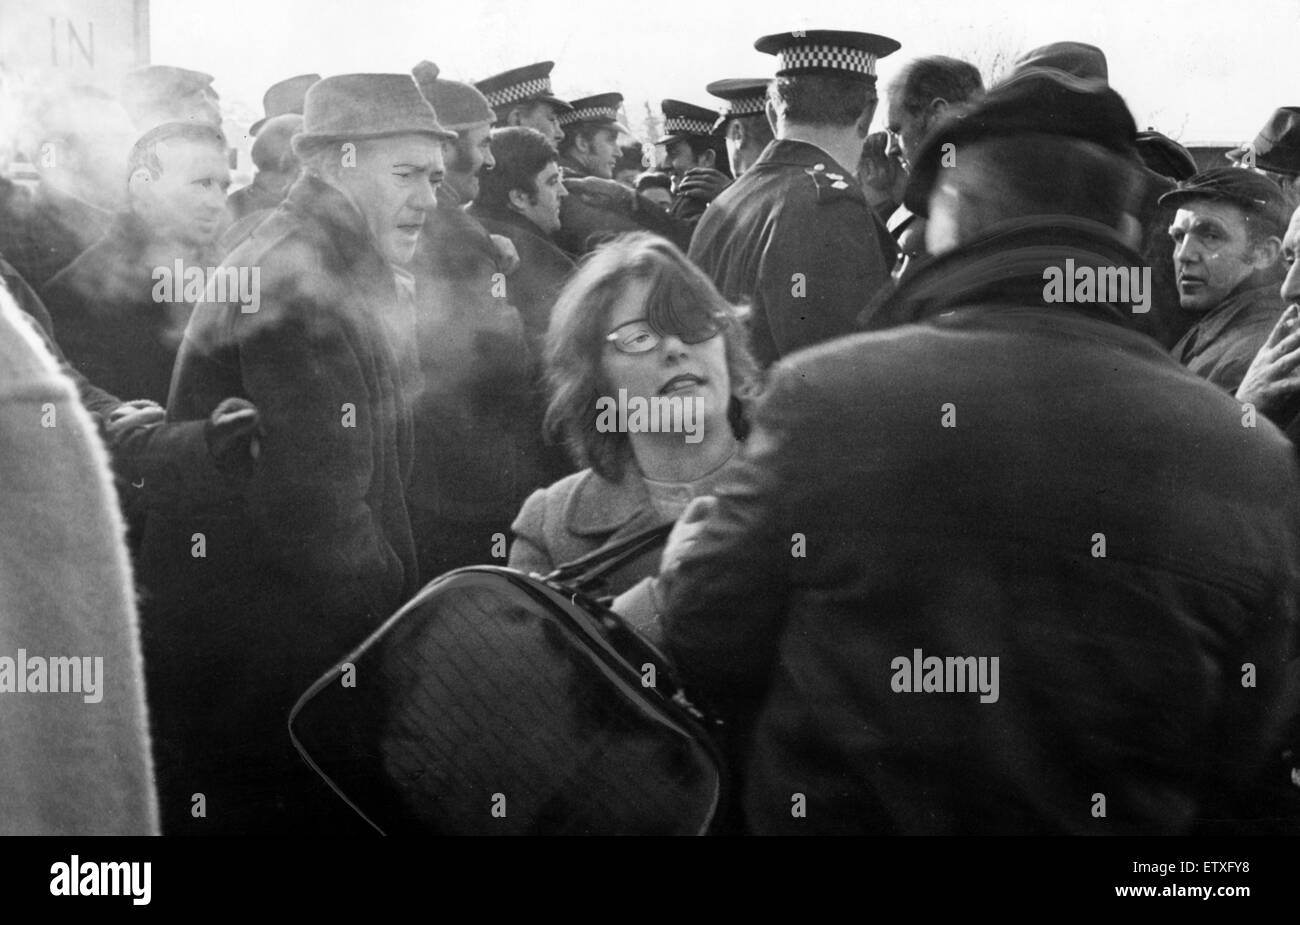 1972 Miners Strike. Scuffles as office workers try to get through Miners Picket Lines at the NCB Offices at Llanishen, Cardiff, Wales, Tuesday 25th January 1972. Stock Photo